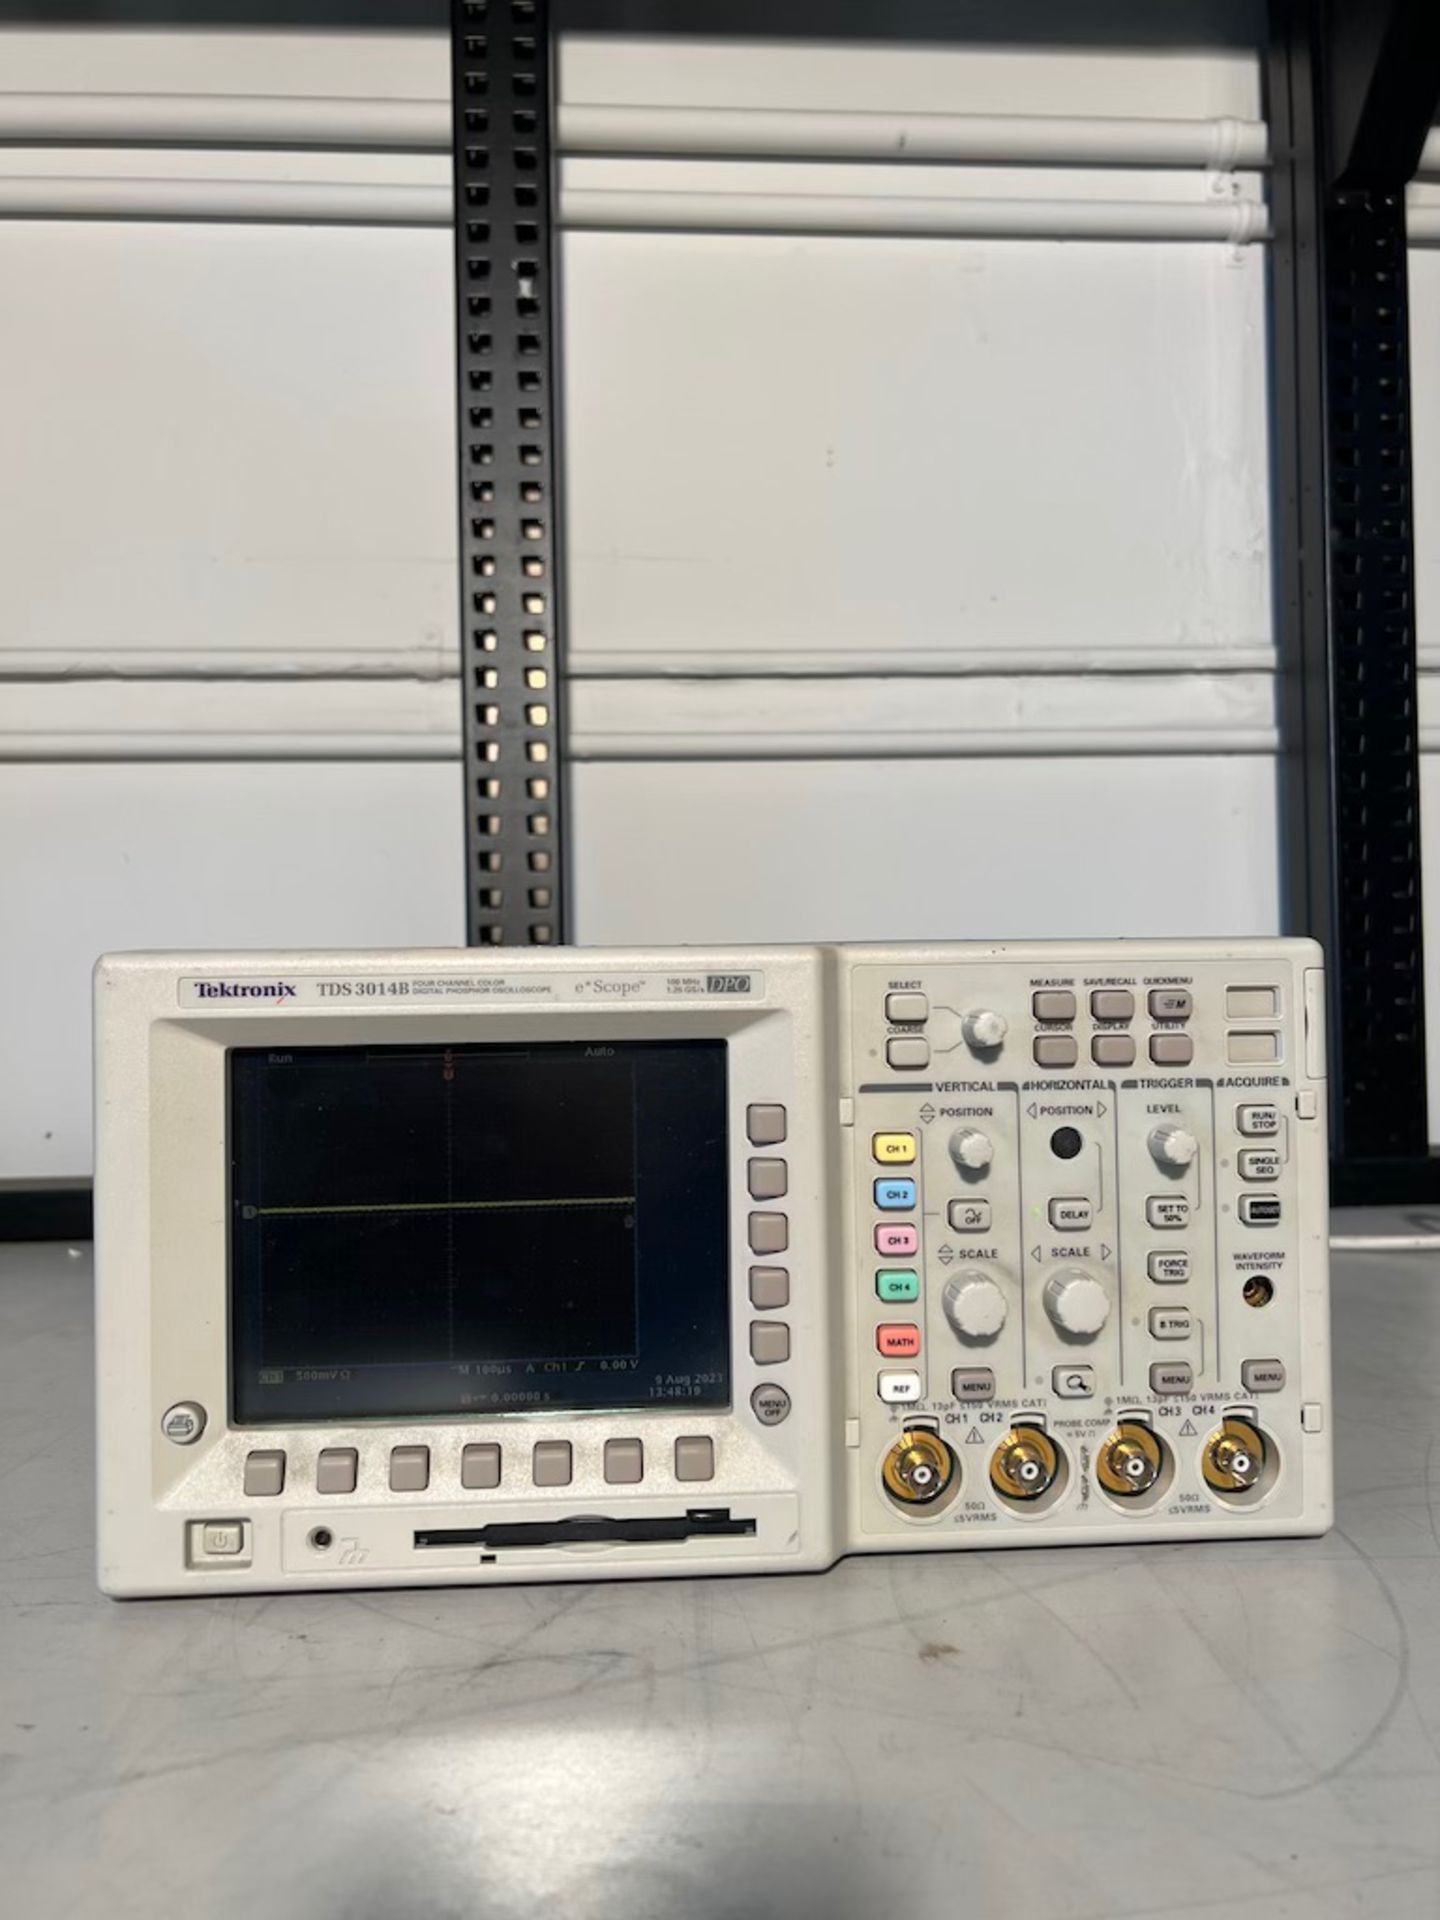 Tektronix TDS30114B Four Channel Color Digital Phosphor Oscilloscope 100Mhz 91.25 Gs/s. Located at